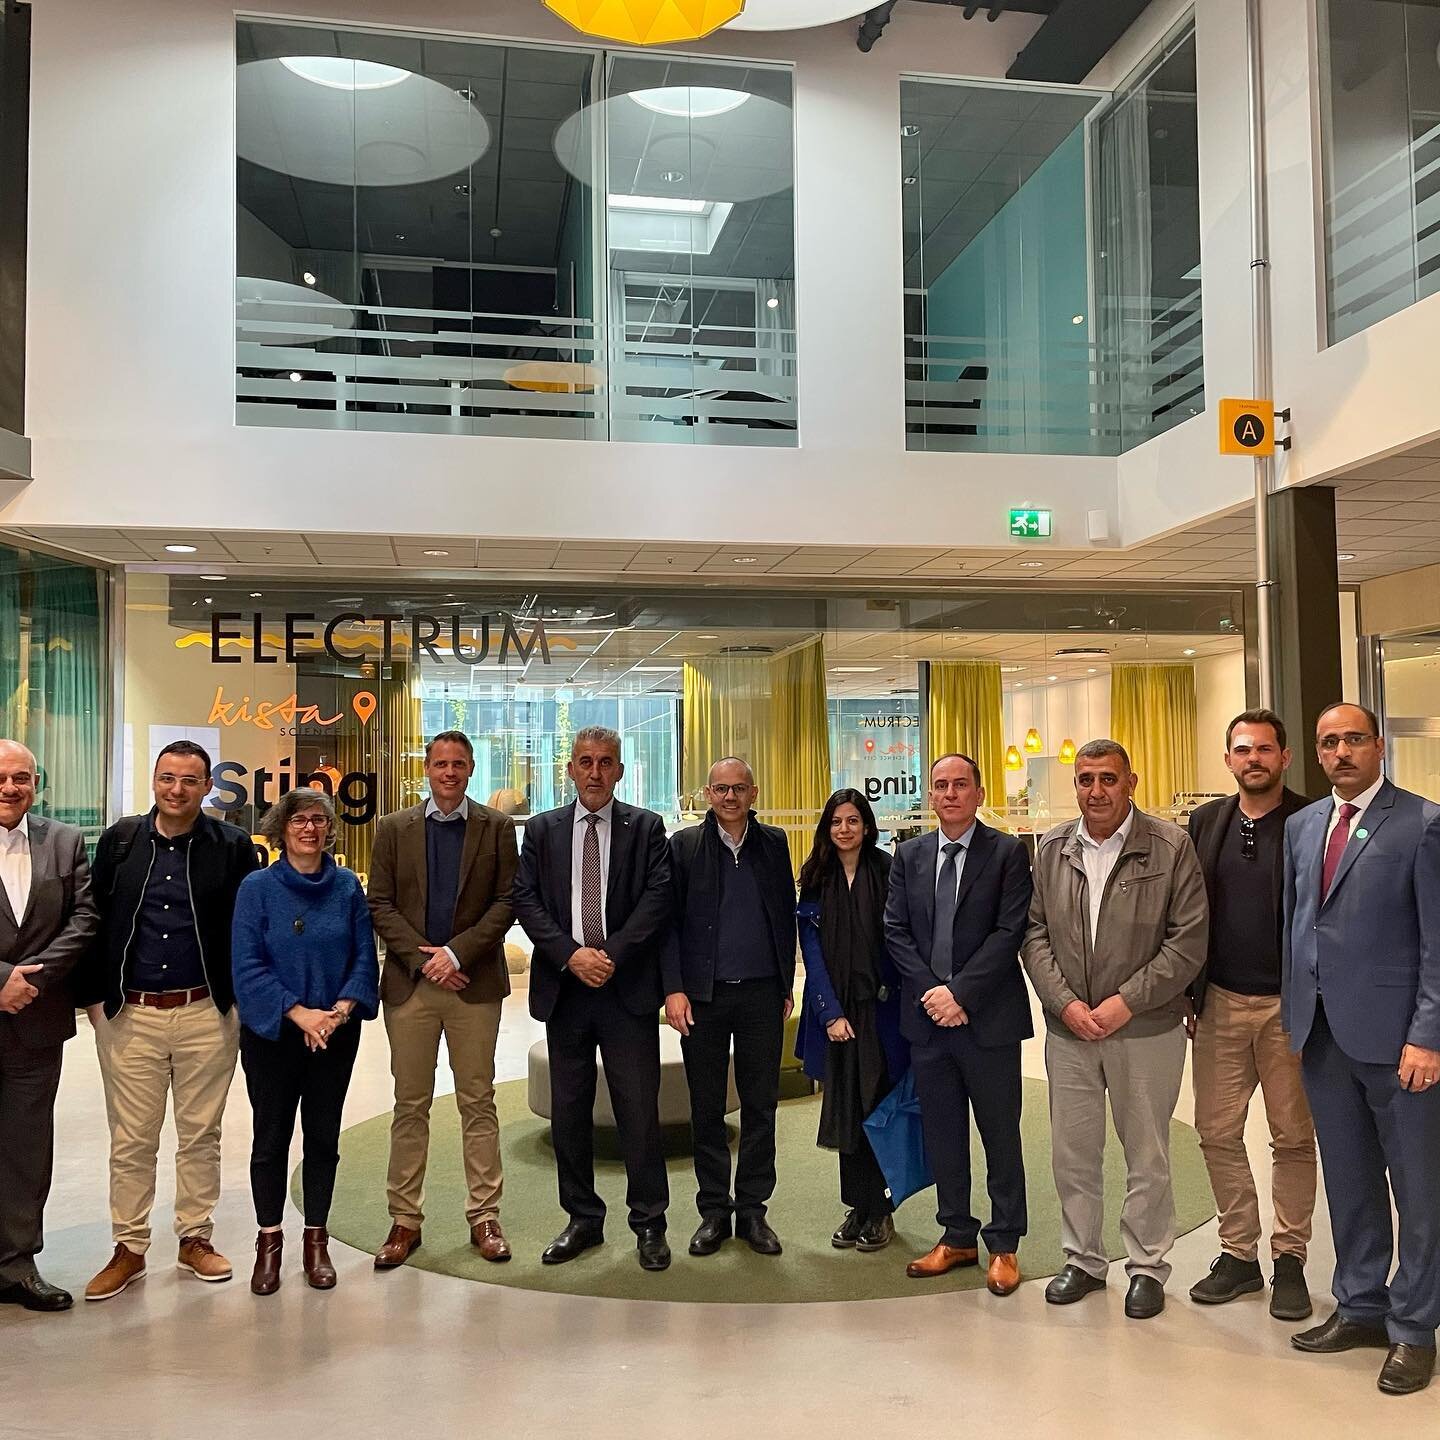 Palestinian Minister For Local Government Mr. Majdi Al Saleh Visit Kista !
 
I had the pleasure to welcome the Minister and lecture about the Kista Science City  cluster, the KSC organization and Urban ICT Arena to the Minister and a delegation consi